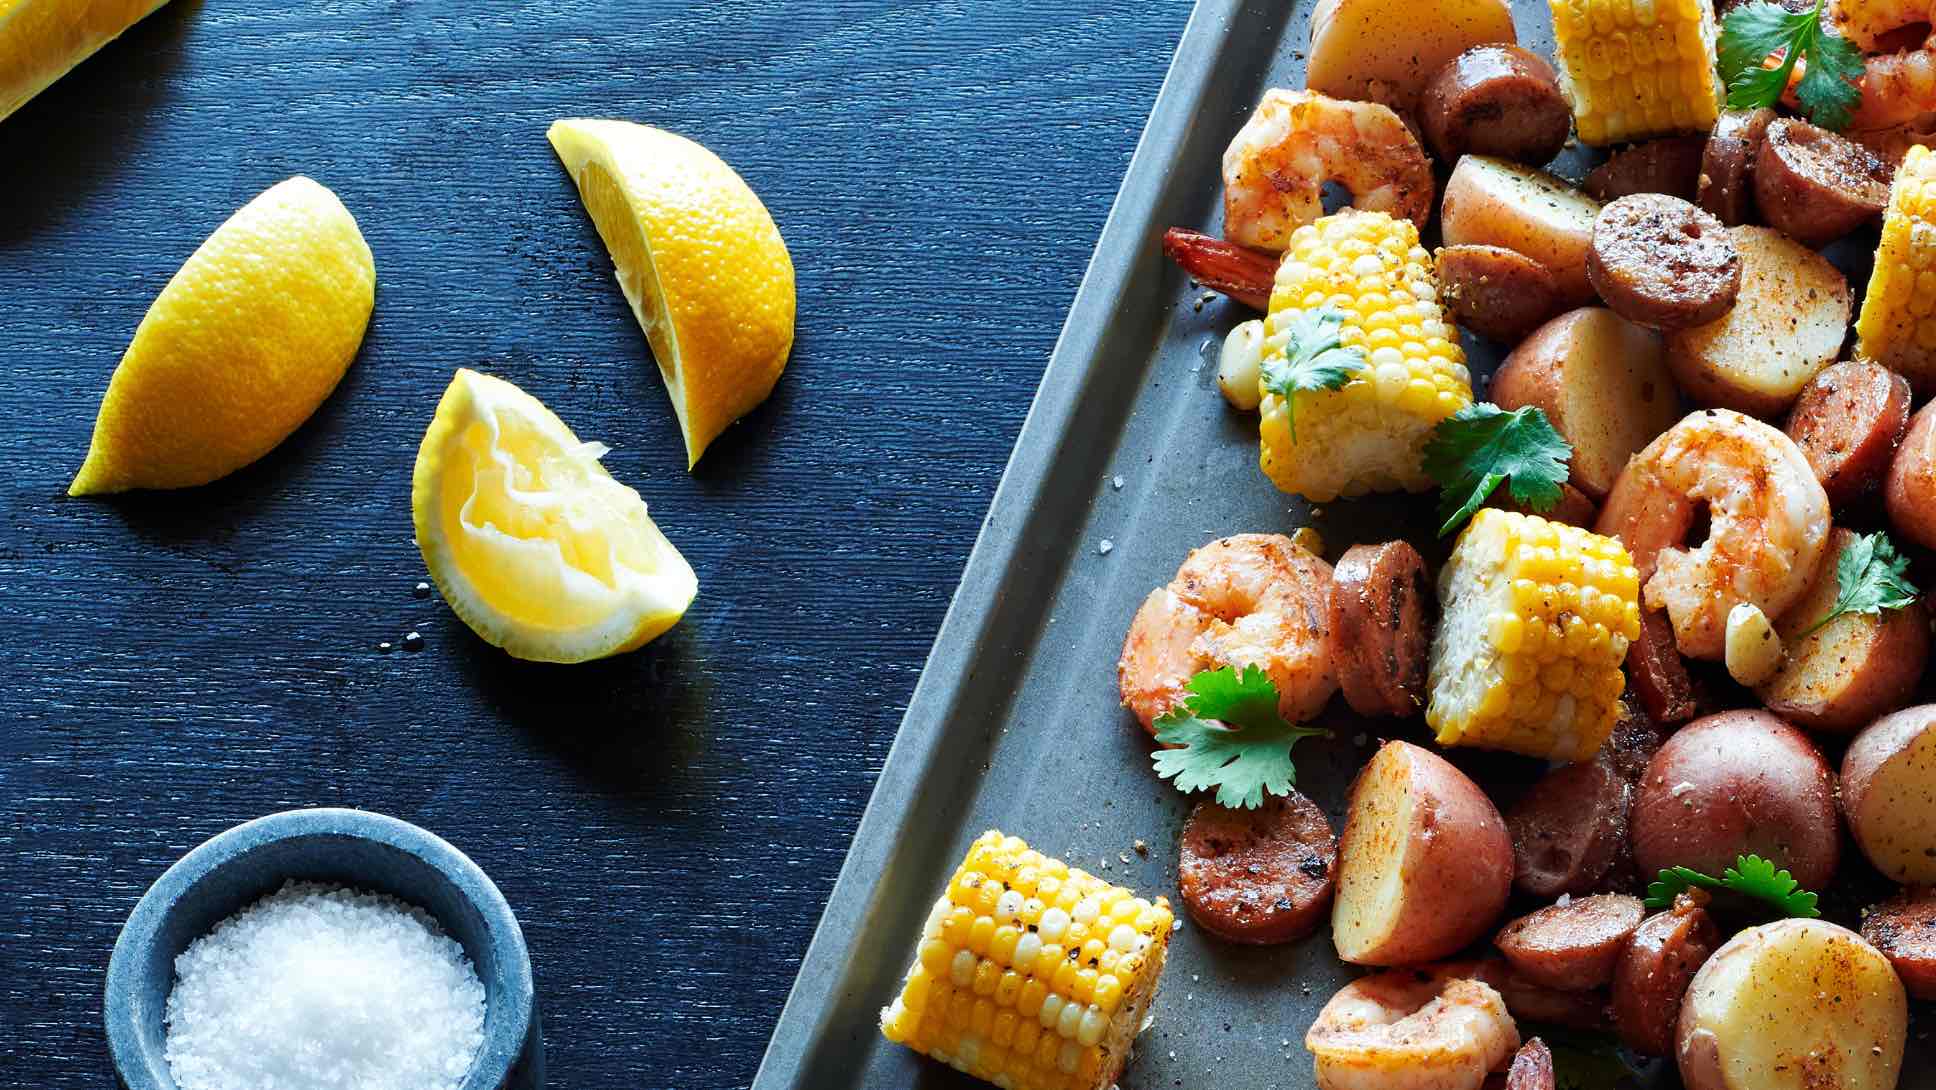 Corn, sausage, shrimp, and potatoes on a sheet pan, with a bowl of sea salt and a few lemon wedges on the table next to it.